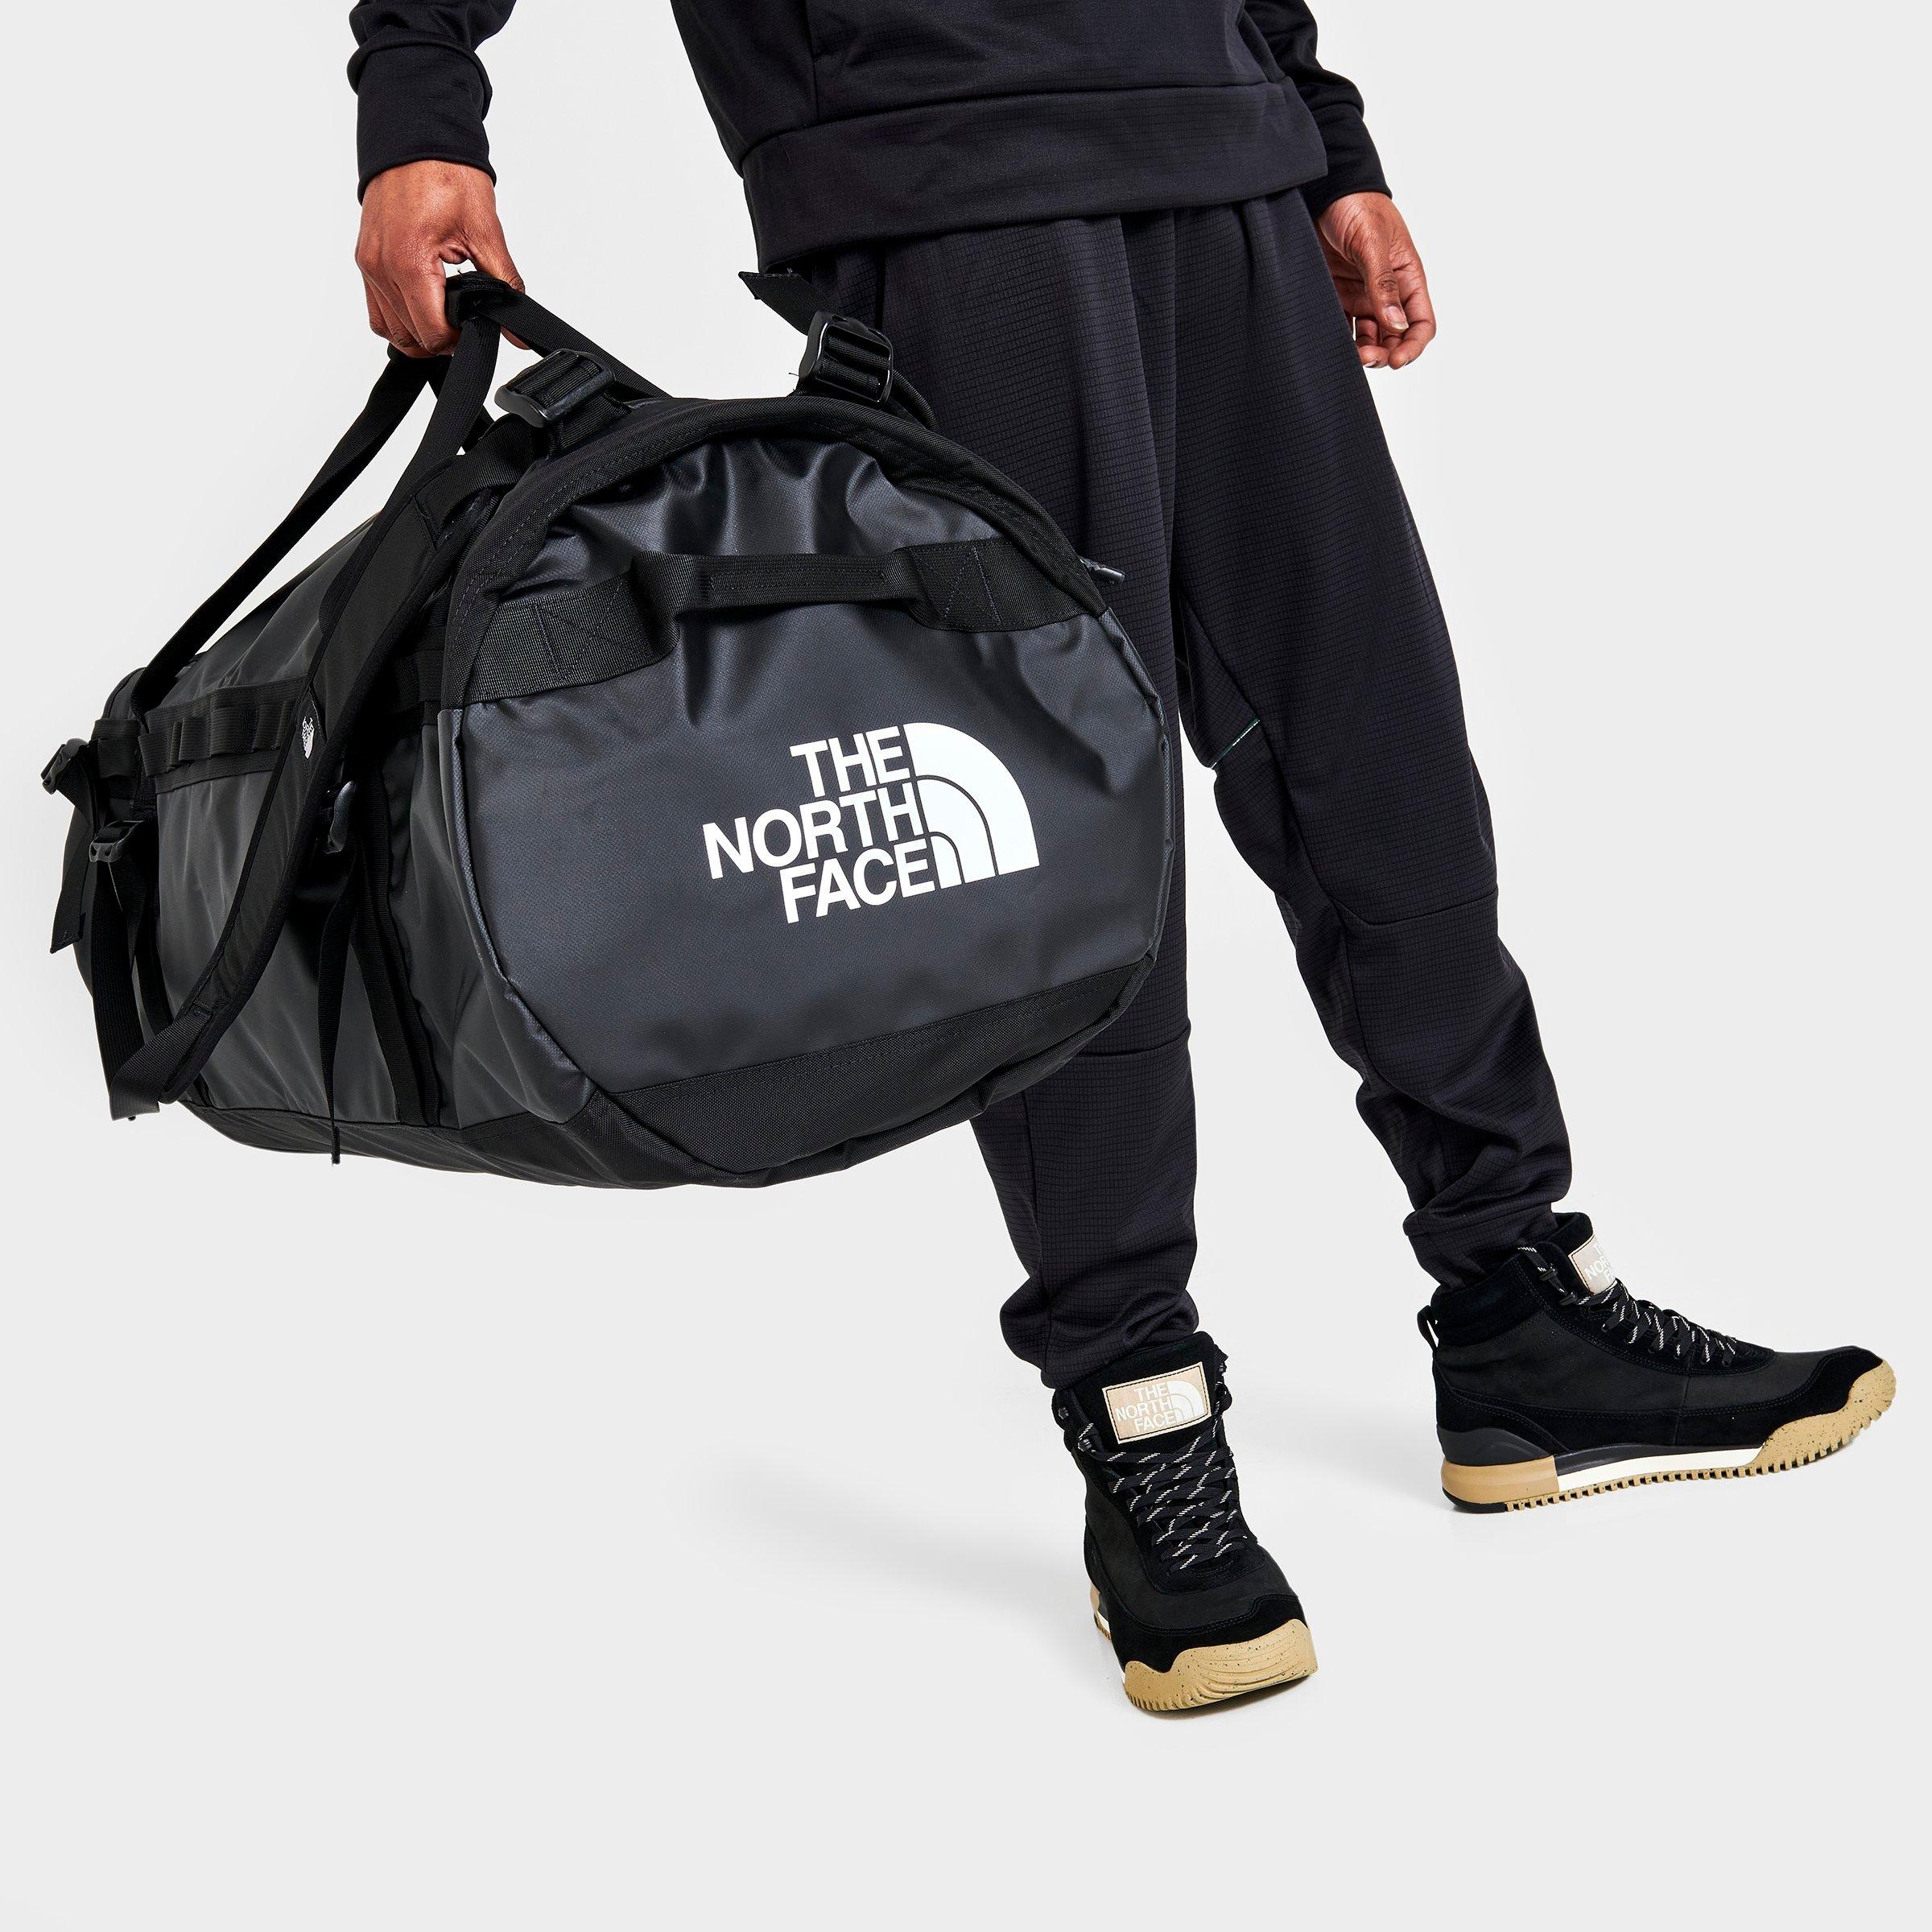 The North Face Inc Base Camp Large Duffel Bag